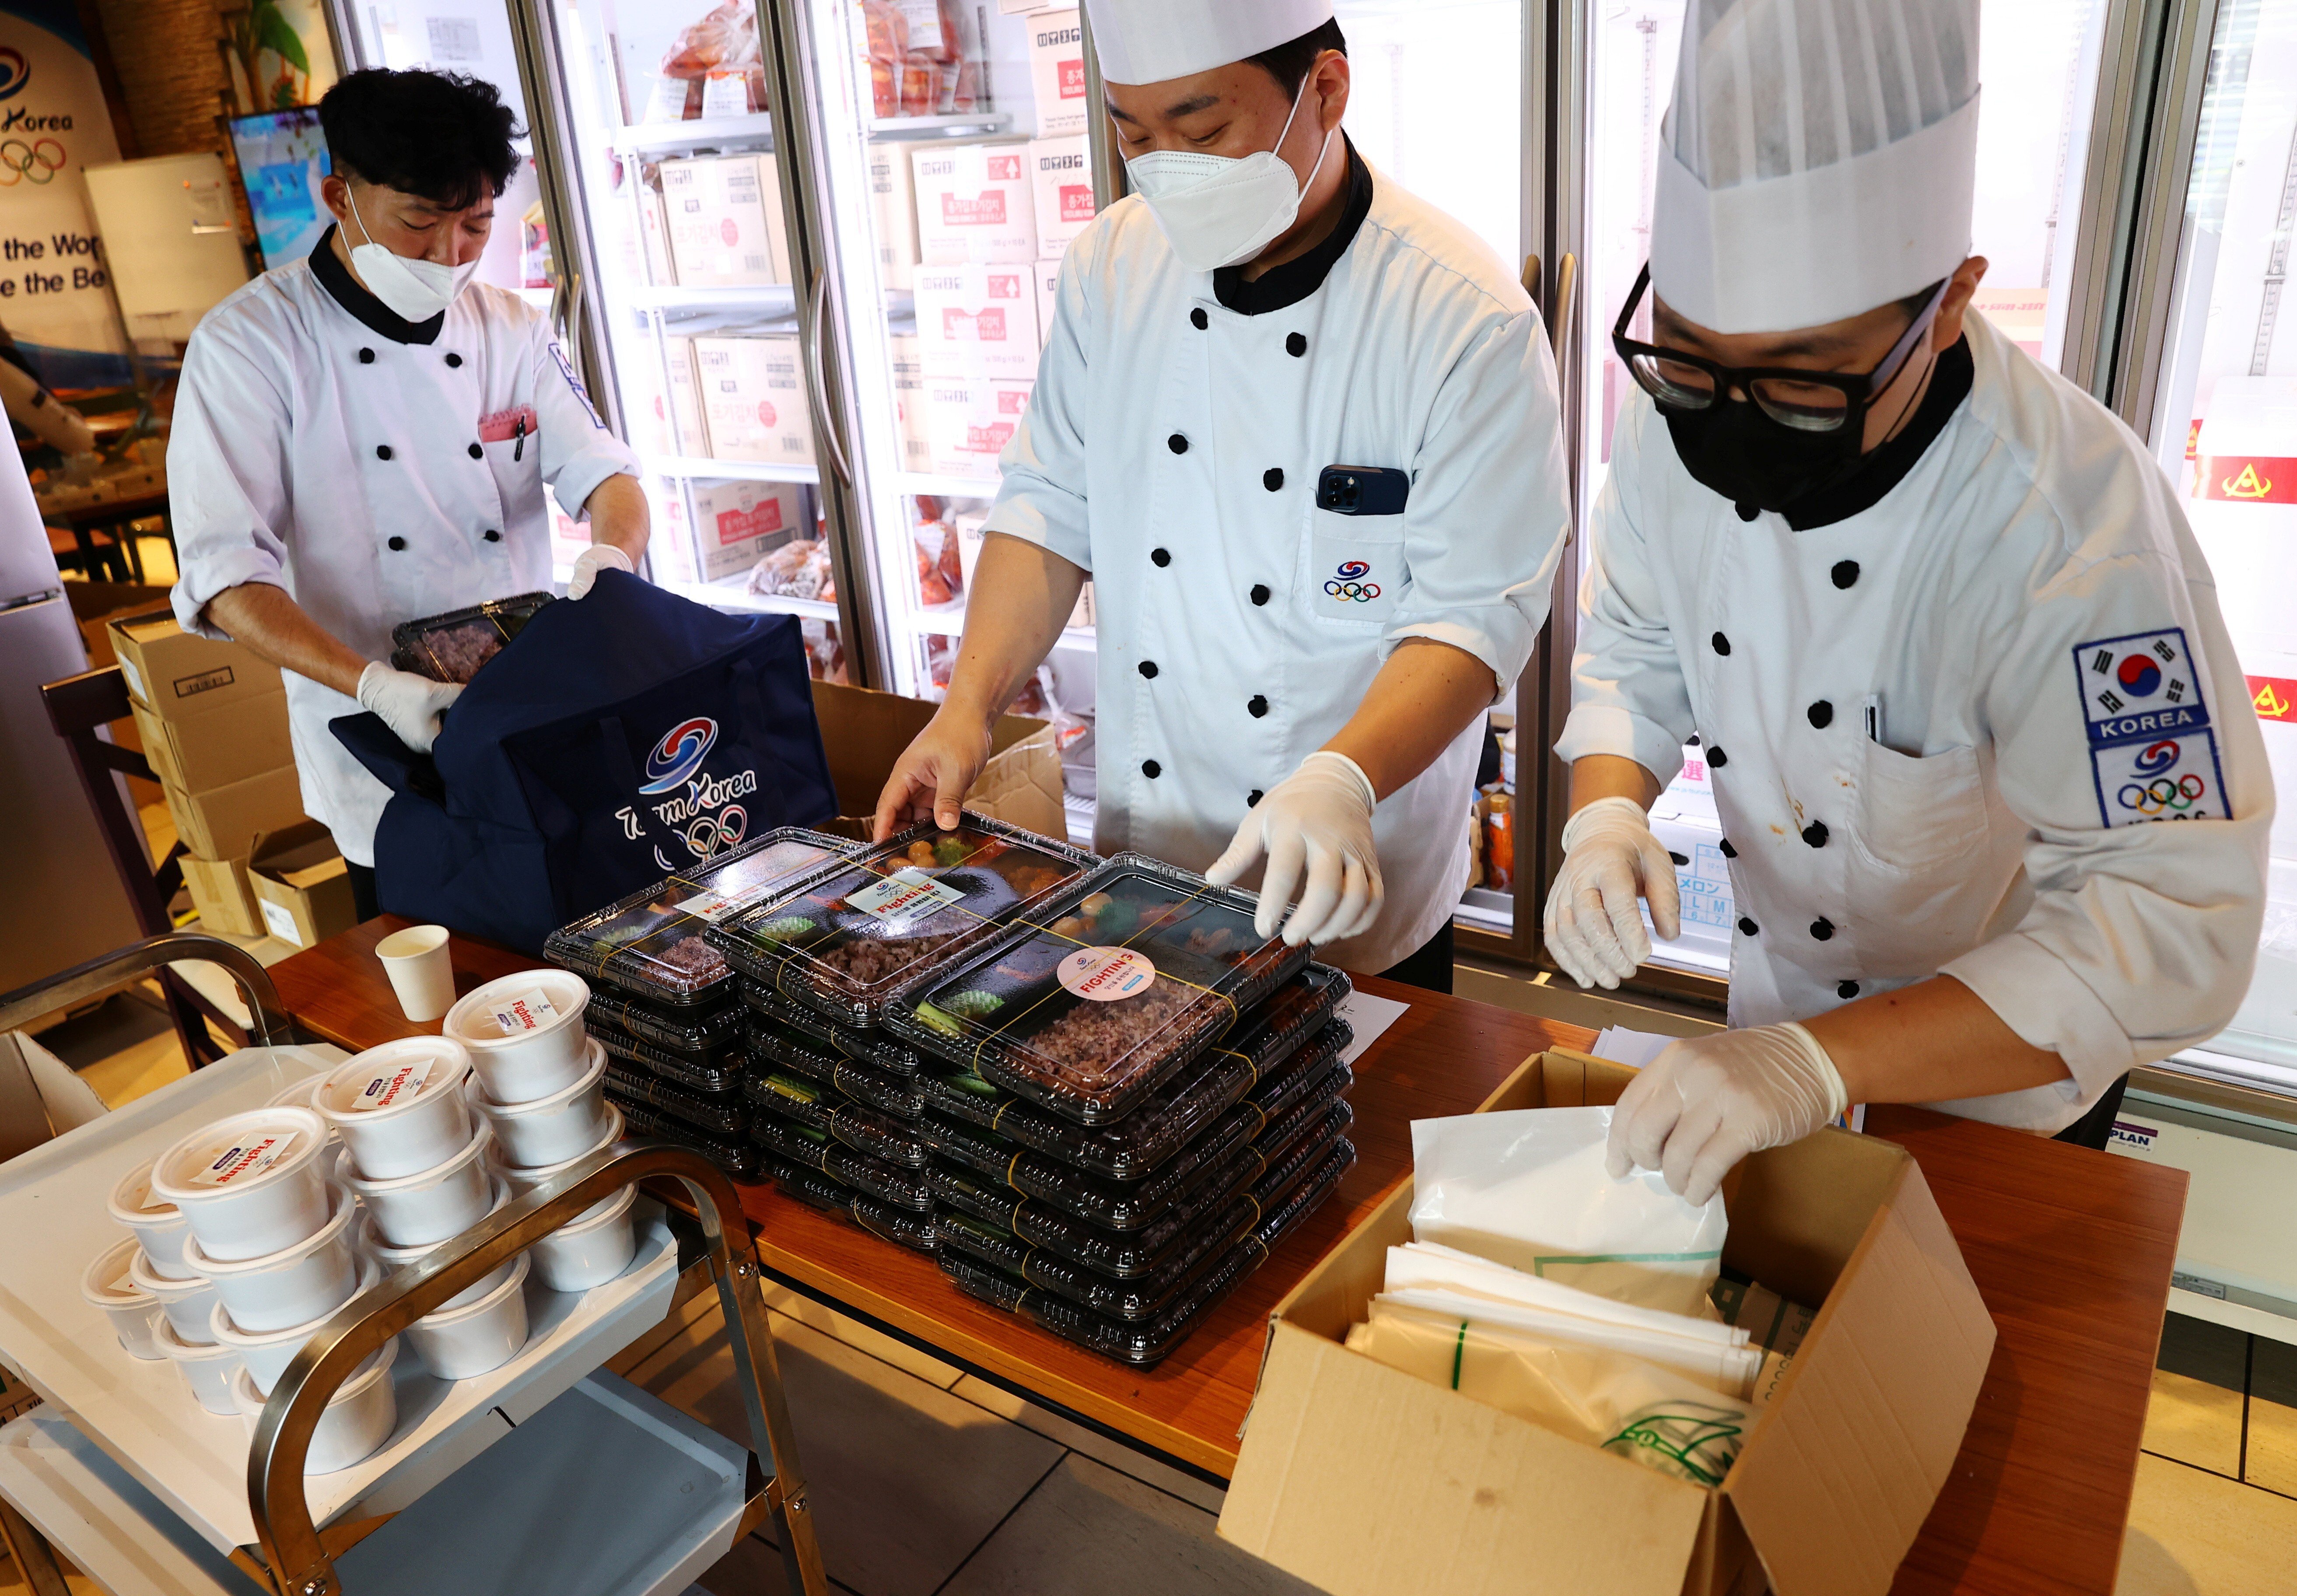 Chefs dispatched from South Korea prepare boxed meals for the country‘s Tokyo 2020 Olympic Games delegation at a hotel in Japan rented out for their sole use. Photo: Reuters